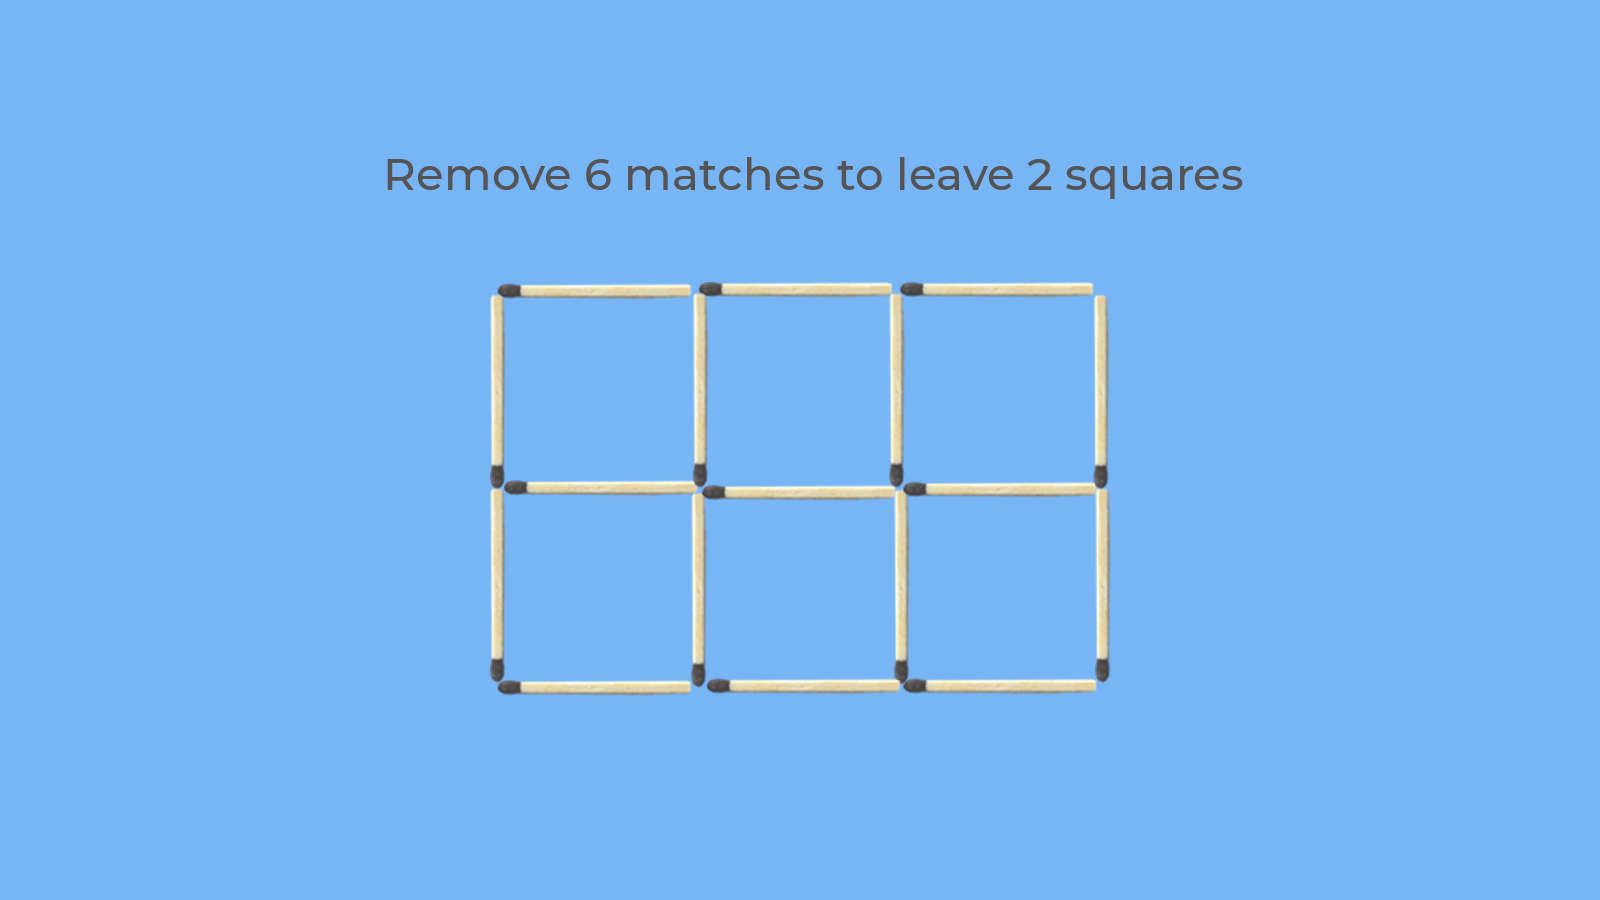 Remove 6 matches to leave exactly 2 squares puzzle